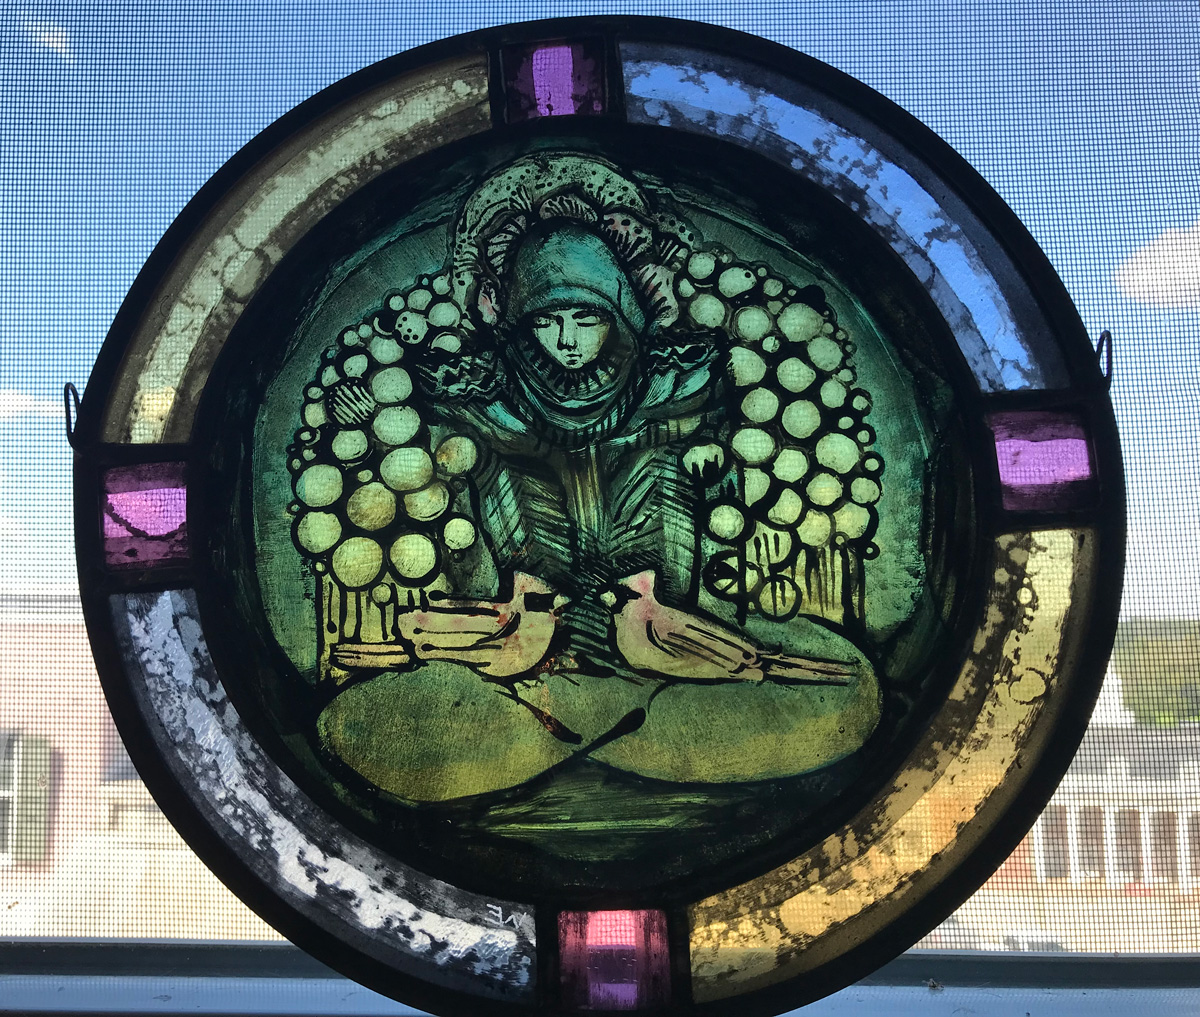 Wendy Eddleman's stained glass pice Nurtured, with a sitting figure in the center